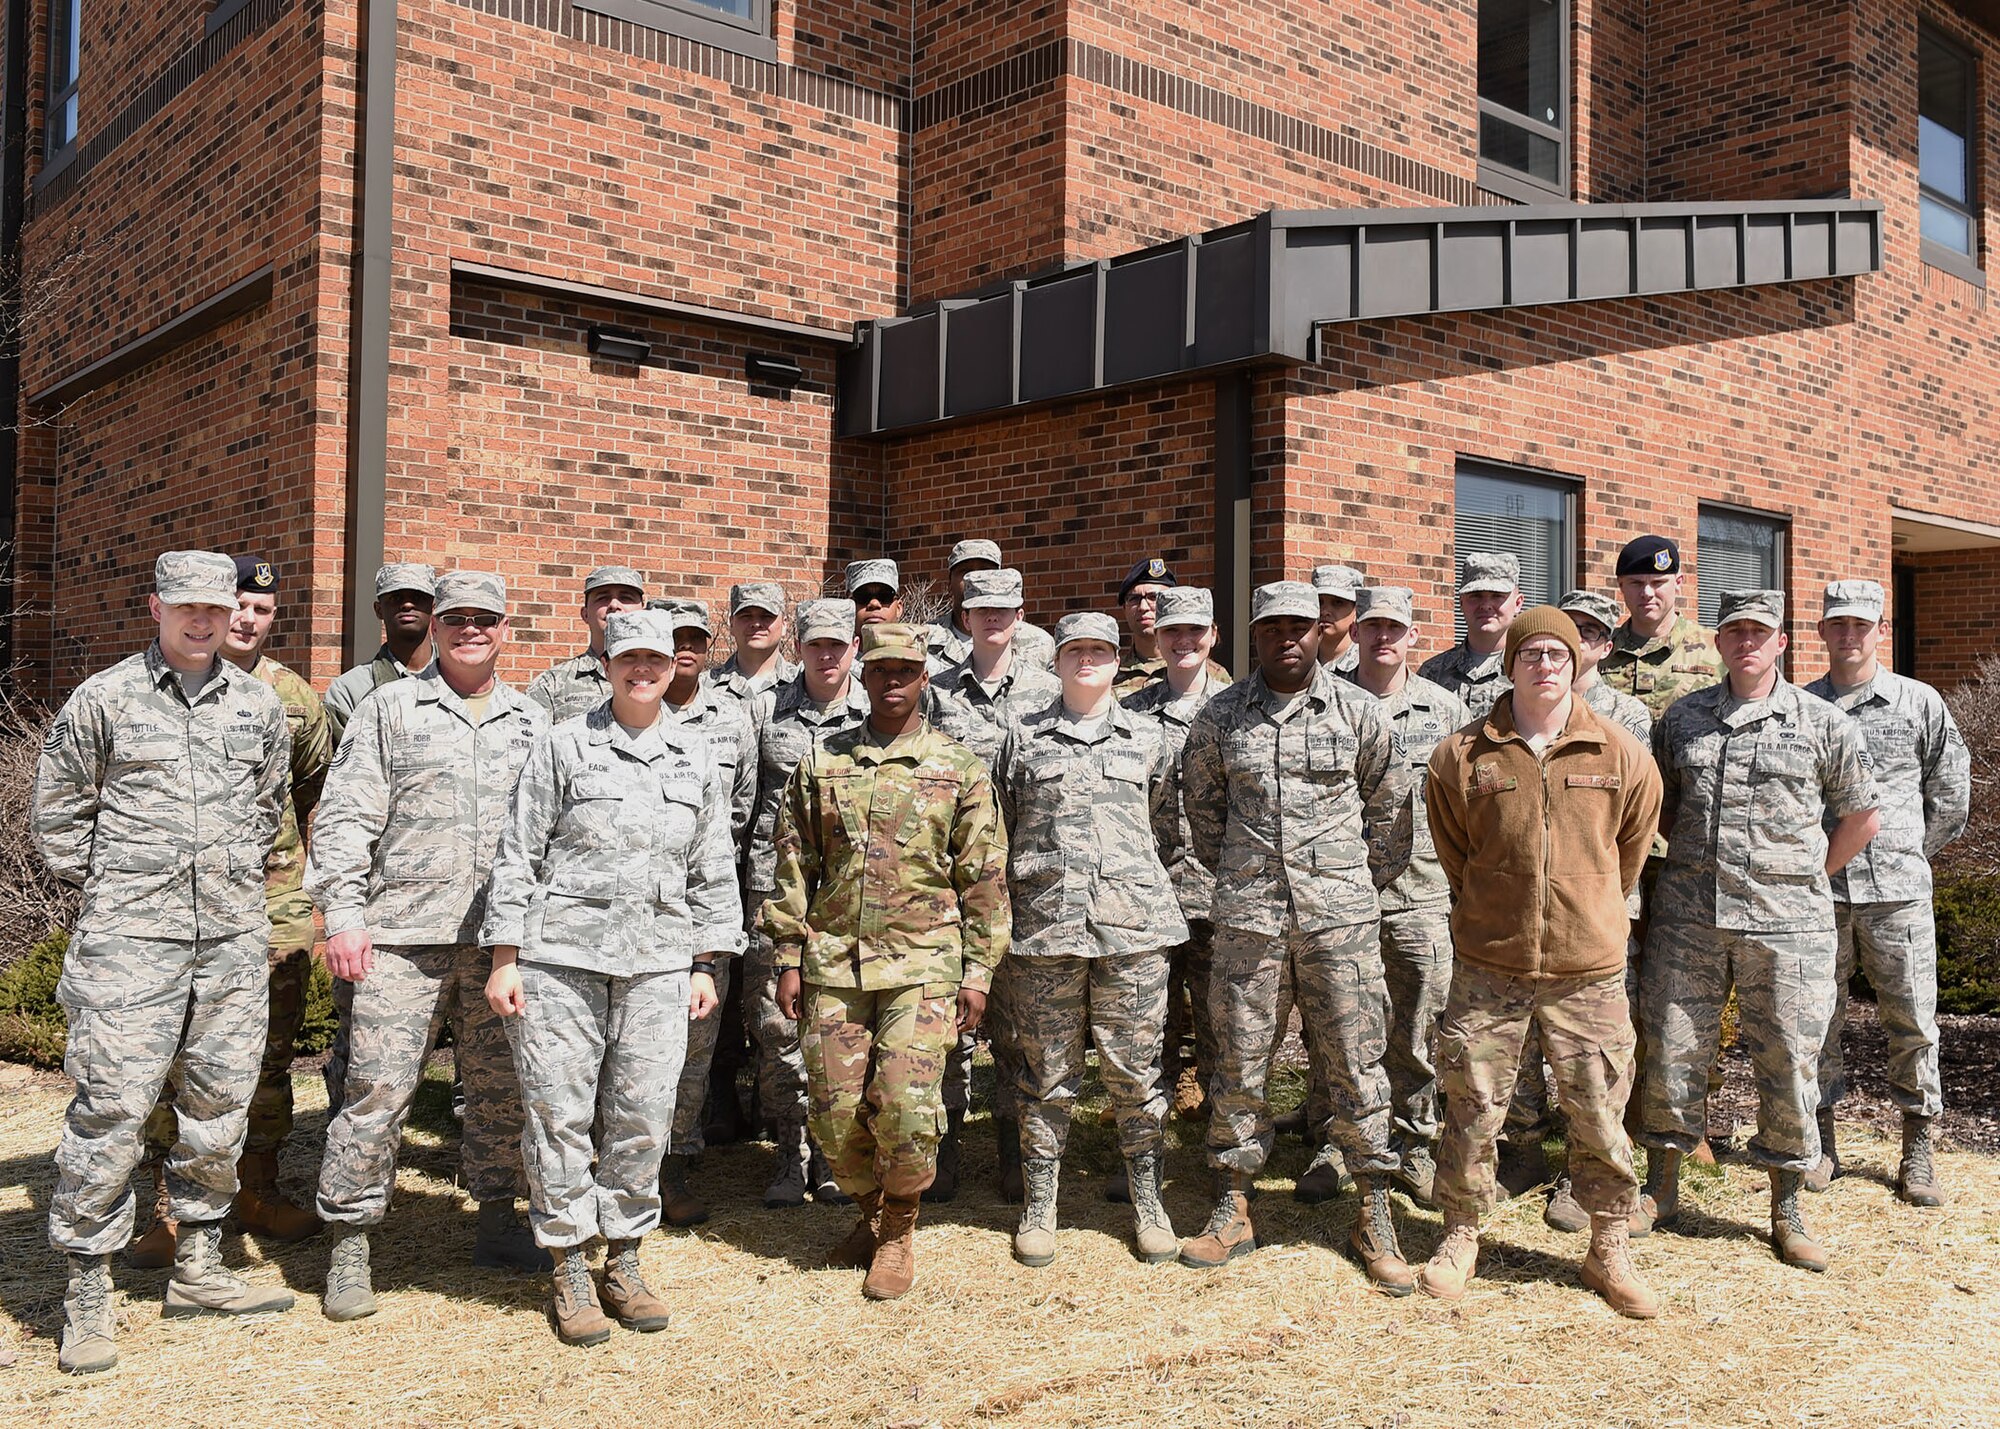 Students from the 434th Air Refueling Wing pose for a group photo during their Non-commissioned Officers Leadership Development course April 5, 2019 at Grissom Air Reserve Base, Ind. Students participated in a week-long course designed to help them become more effective leaders.